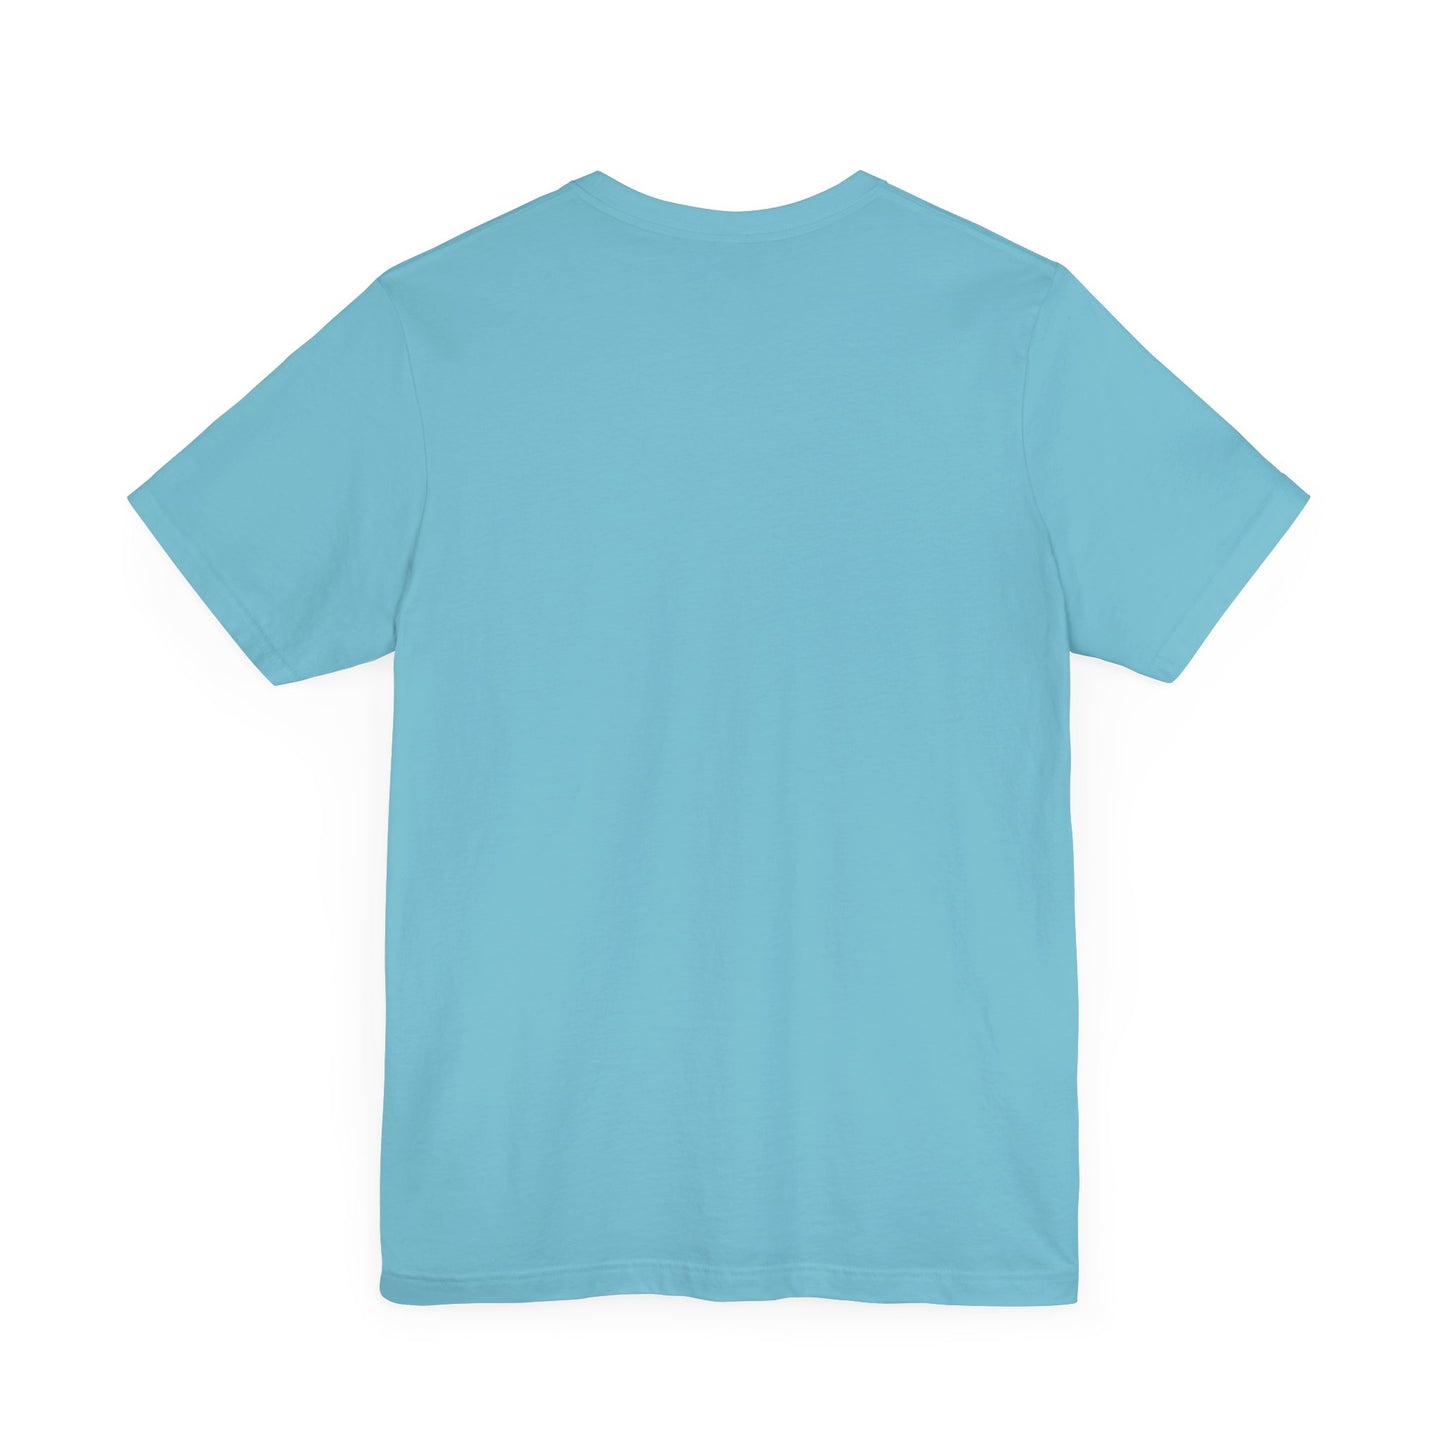 Inspirational "Be Kind" Unisex T-Shirt - 100% Airlume Cotton, Lightweight & Breathable